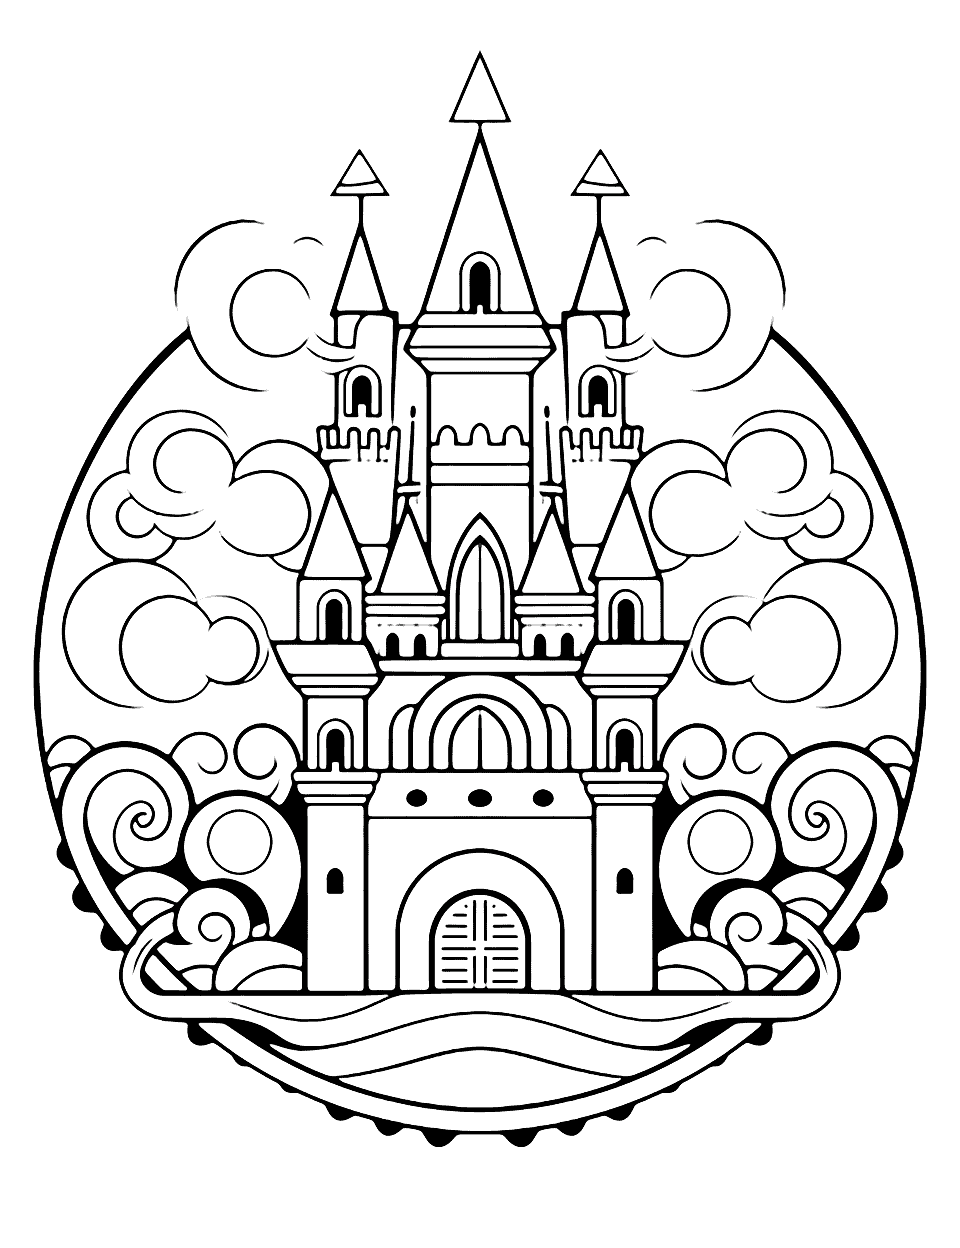 Fairy Tale Castle Mandala Coloring Page - A mandala with a fairy tale castle at the center, surrounded by clouds and wind.